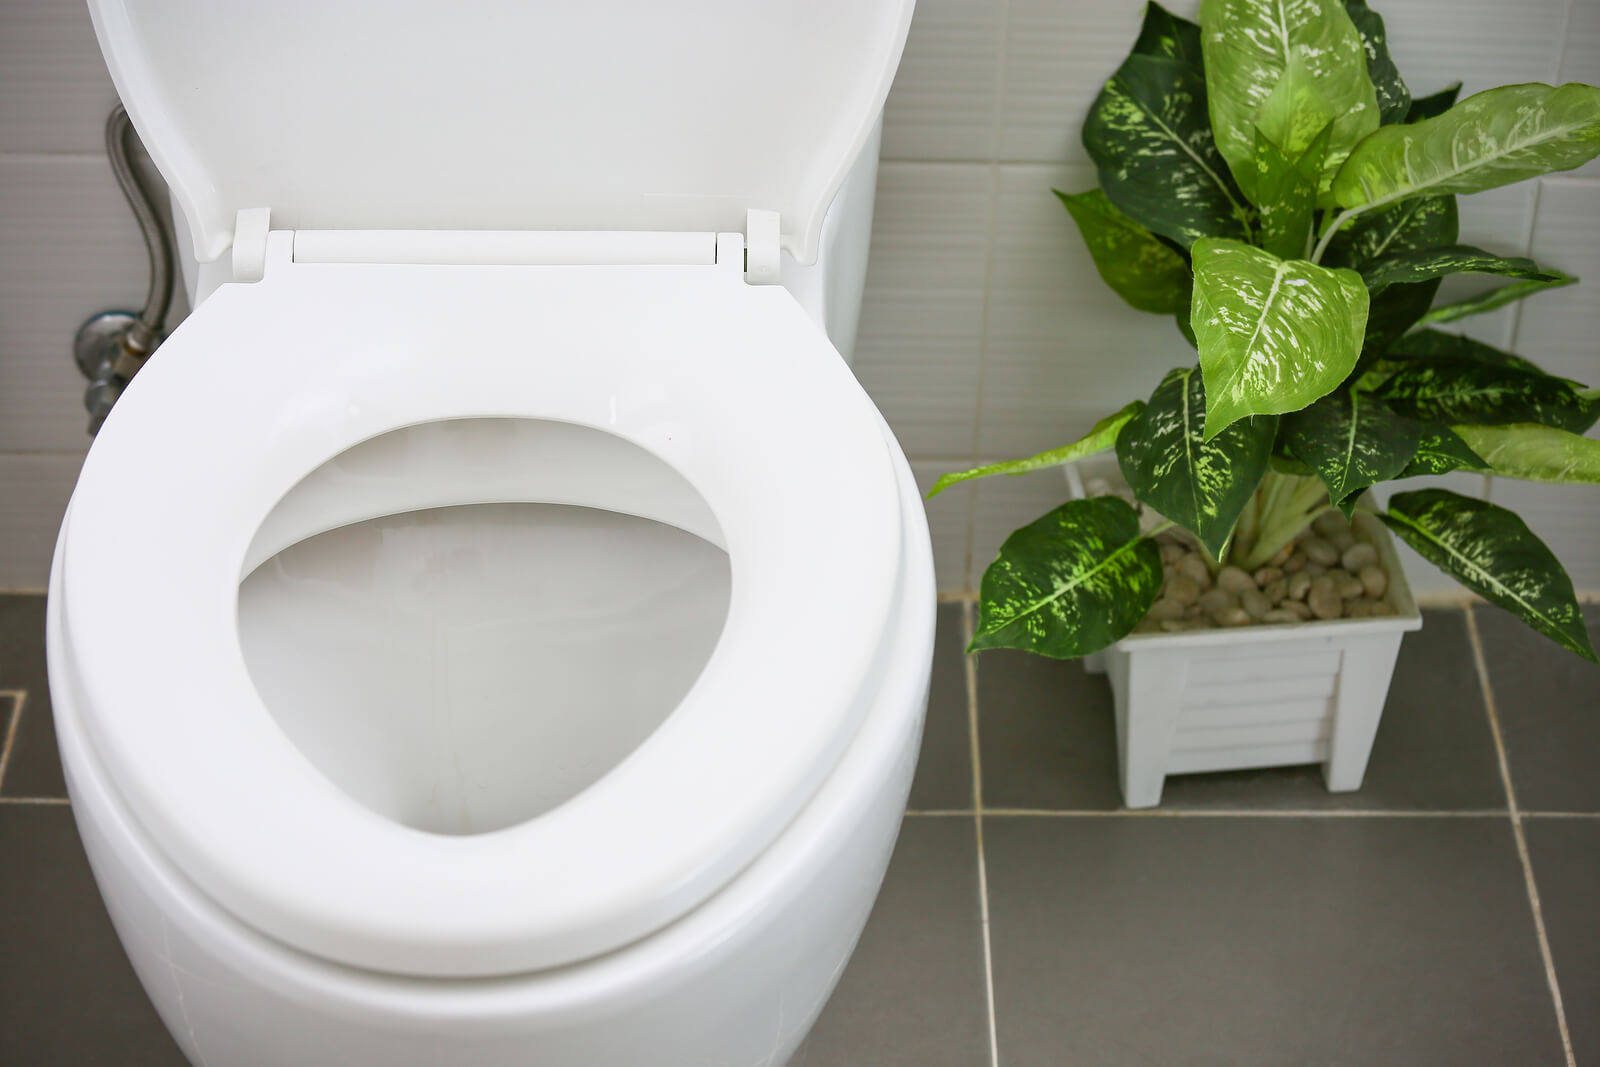 toilet replacement in Sacramento by America's Plumbing